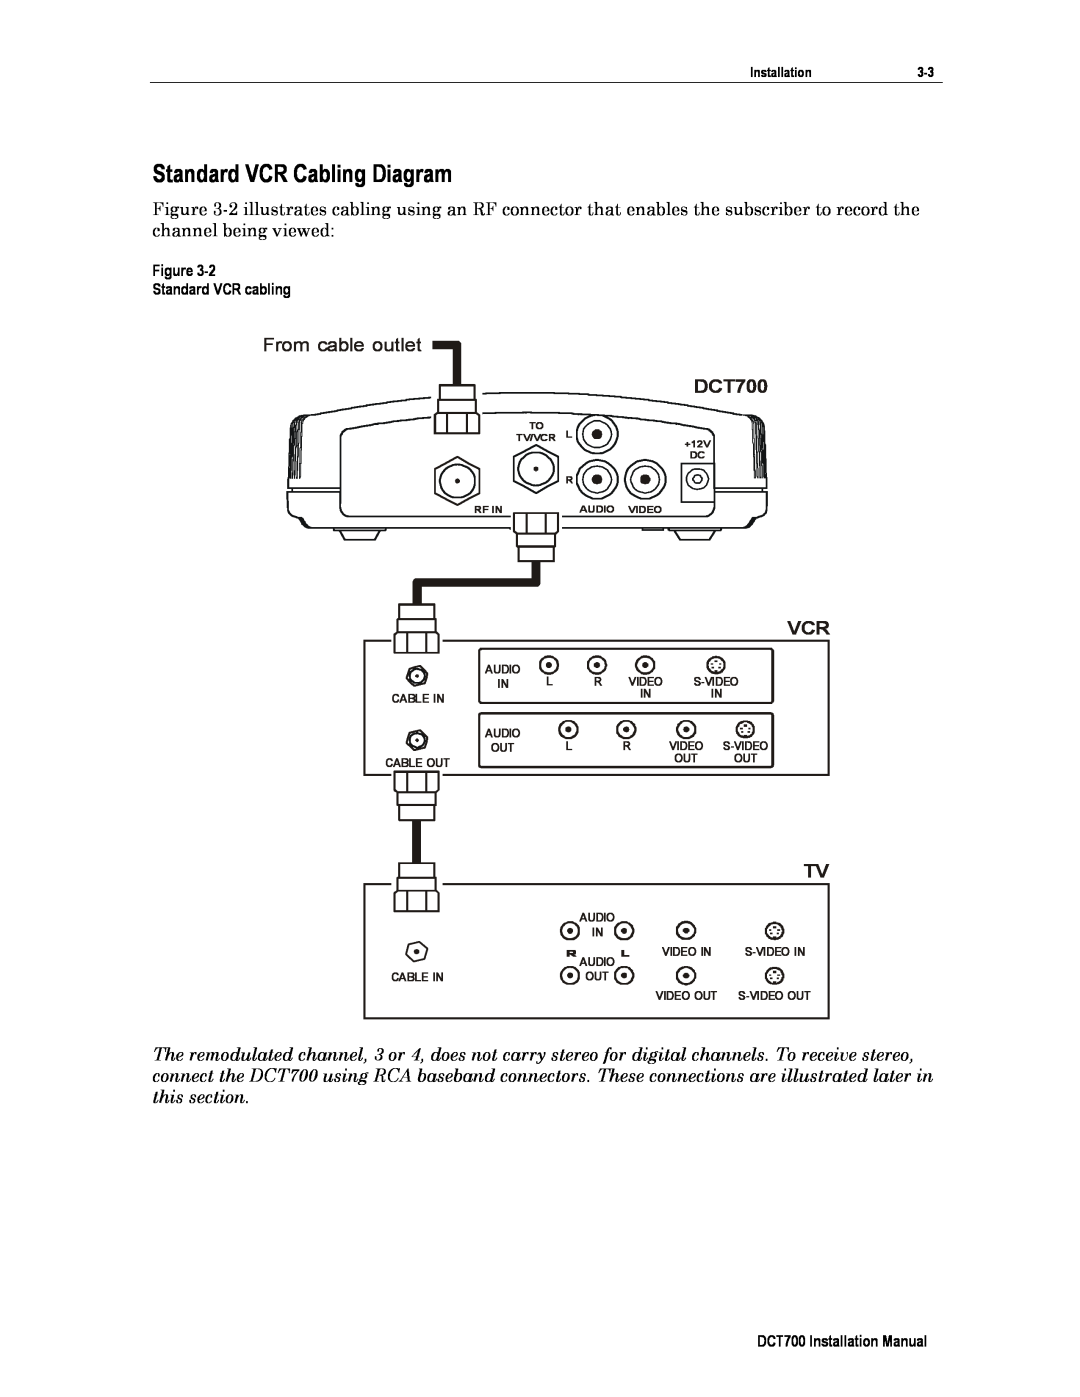 Motorola DCT700, DTC700 installation manual Standard VCR Cabling Diagram, From cable outlet 